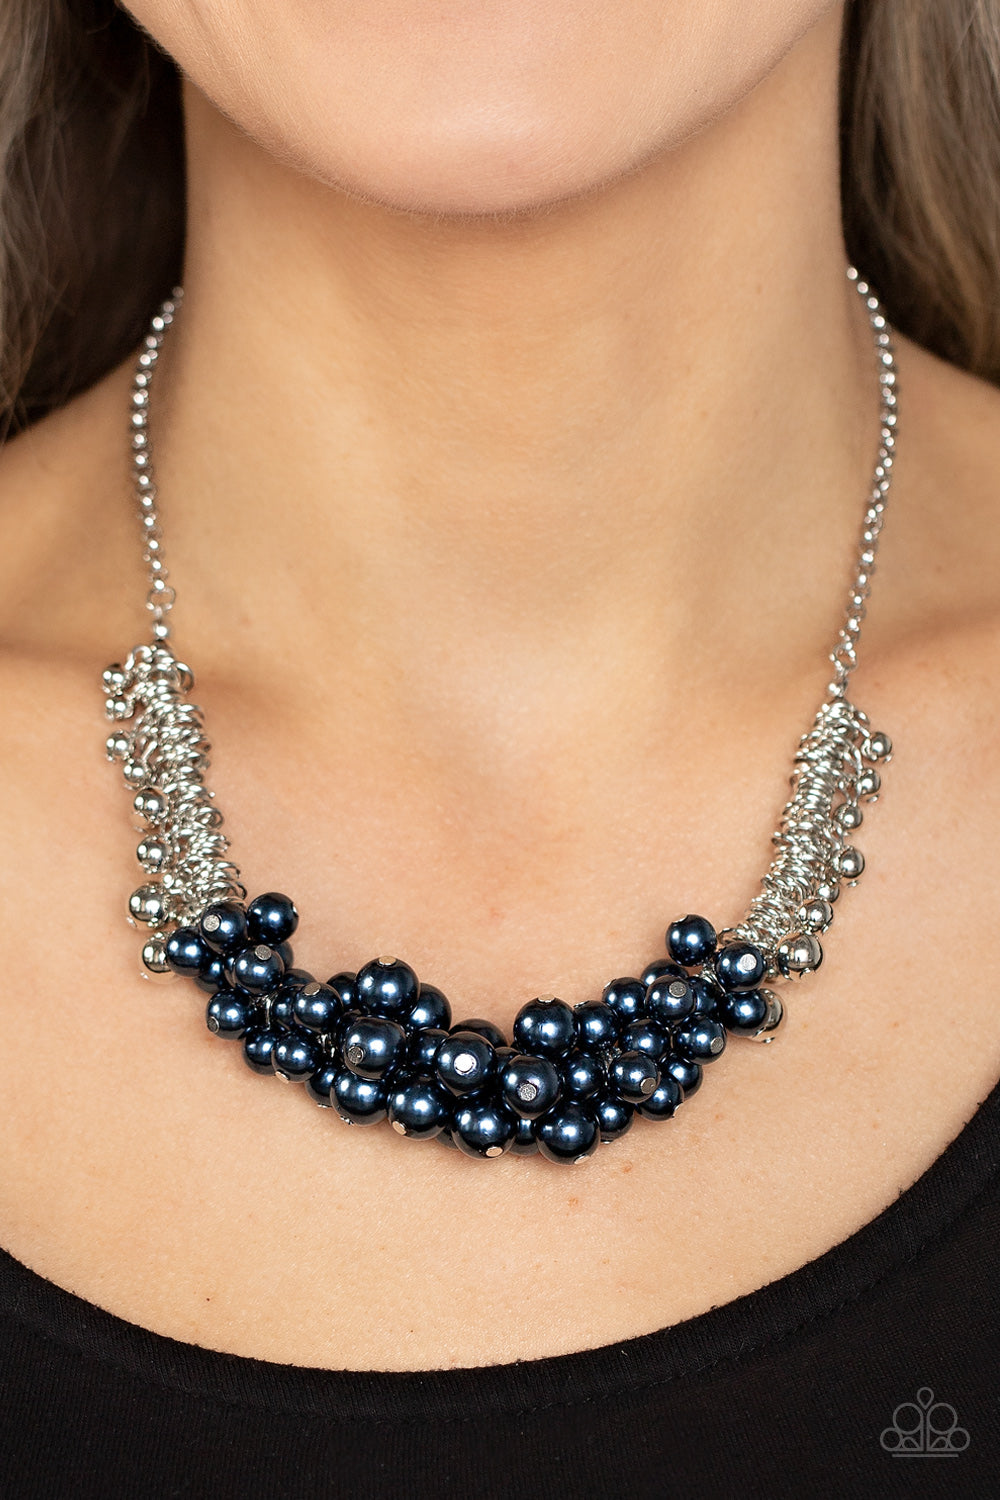 Paparazzi Accessories Bonus Points - Blue A bubbly cluster of blue pearls are bunched together between hanging silver beads that dangle between jampacked rows of silver rings, resulting in exaggerated effervescence below the collar. Features an adjustable